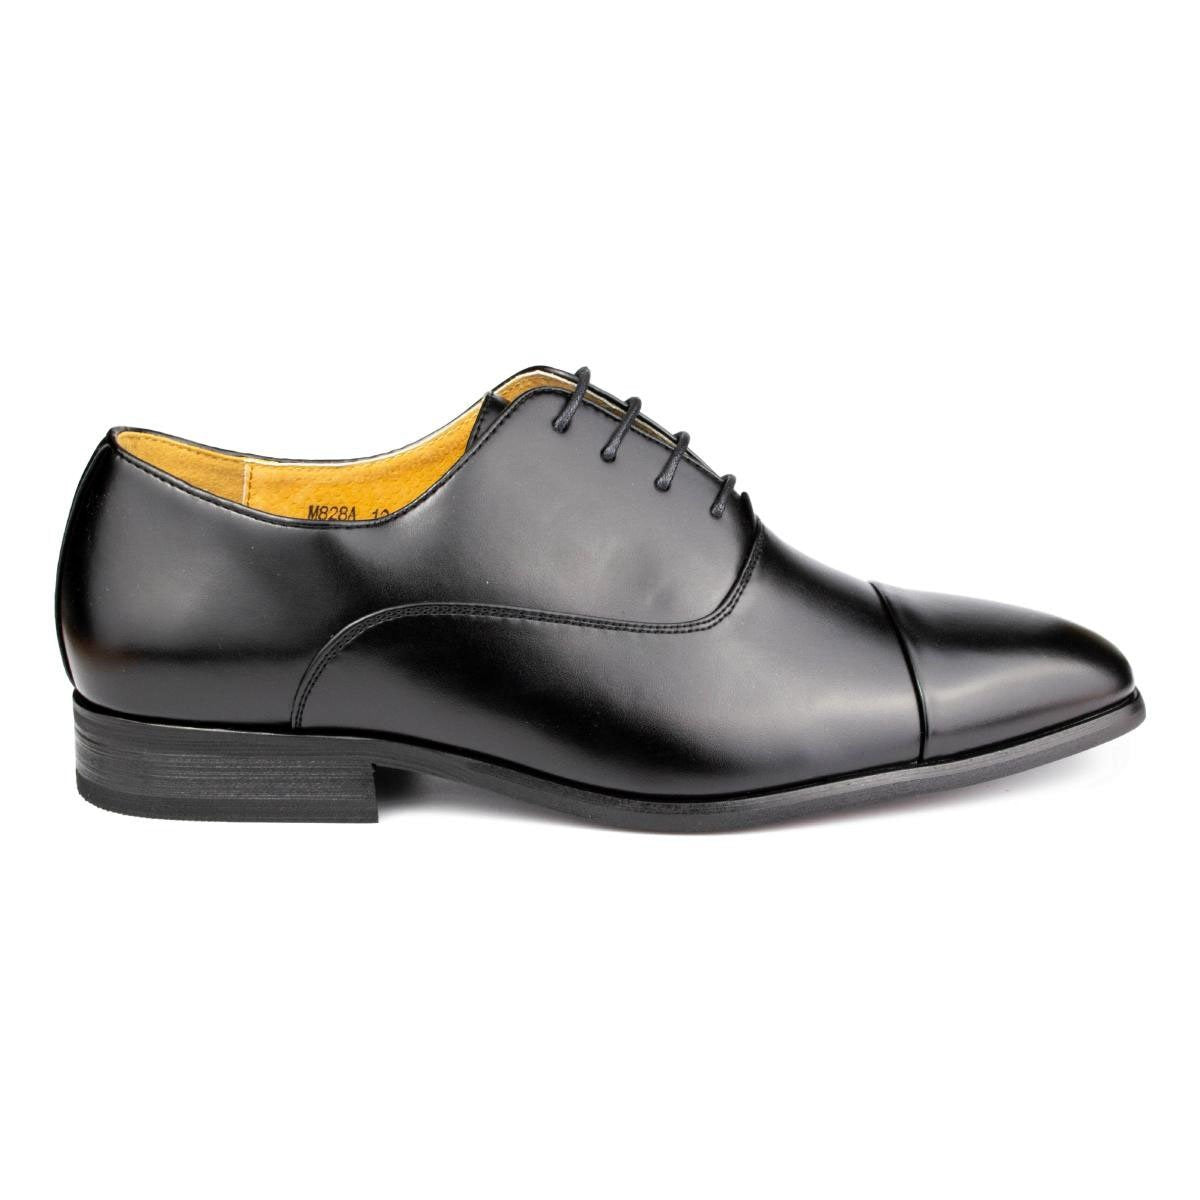 Mens Black Lace Up Oxford Shoe - Watney Shoes 